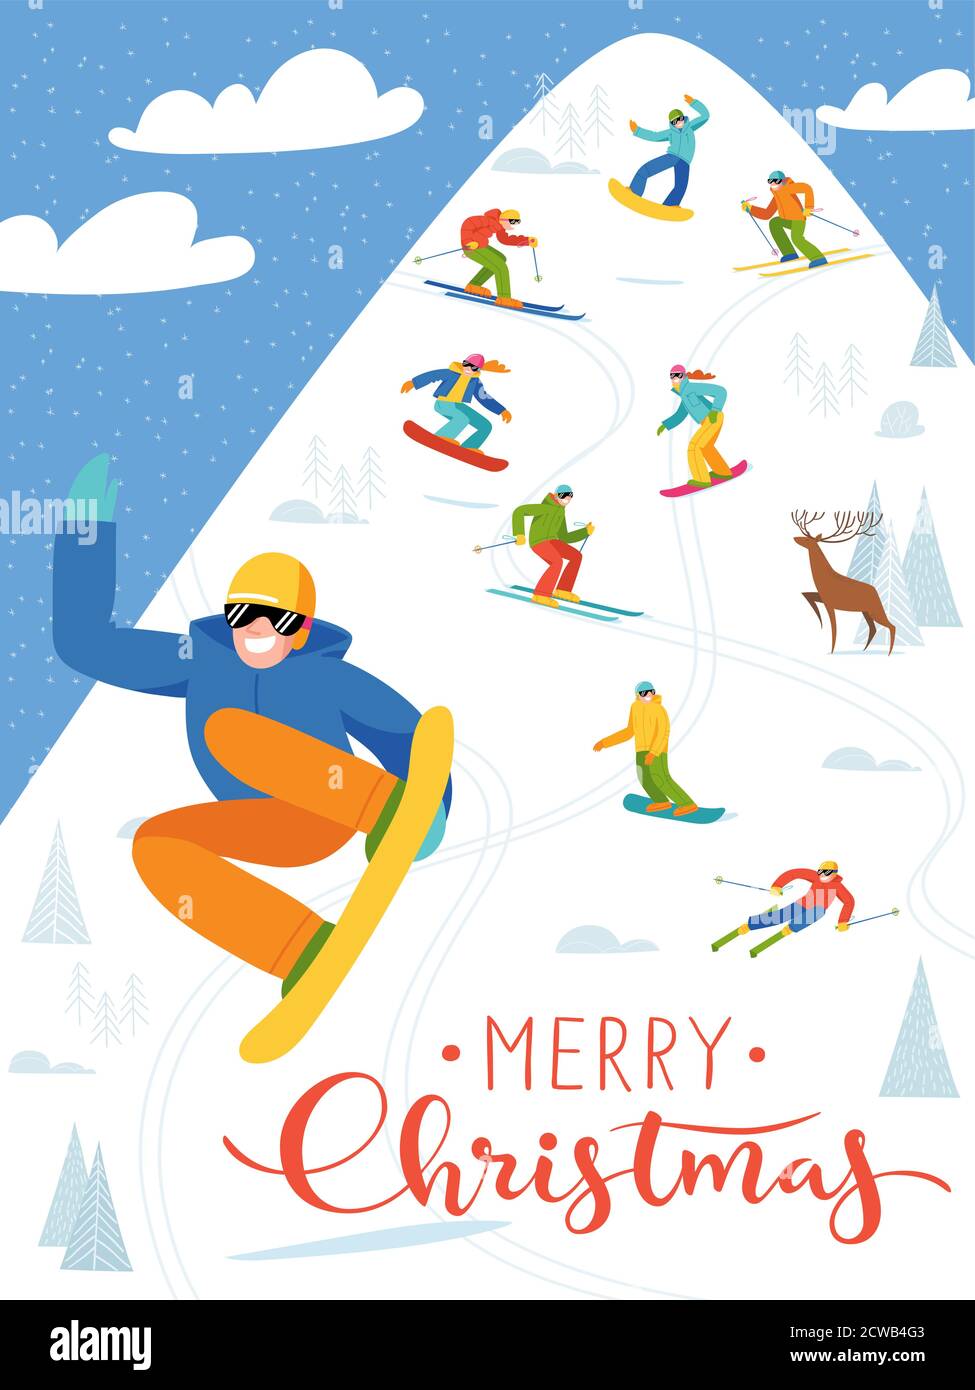 Ski resort poster with people doing winter sports. Stock Vector